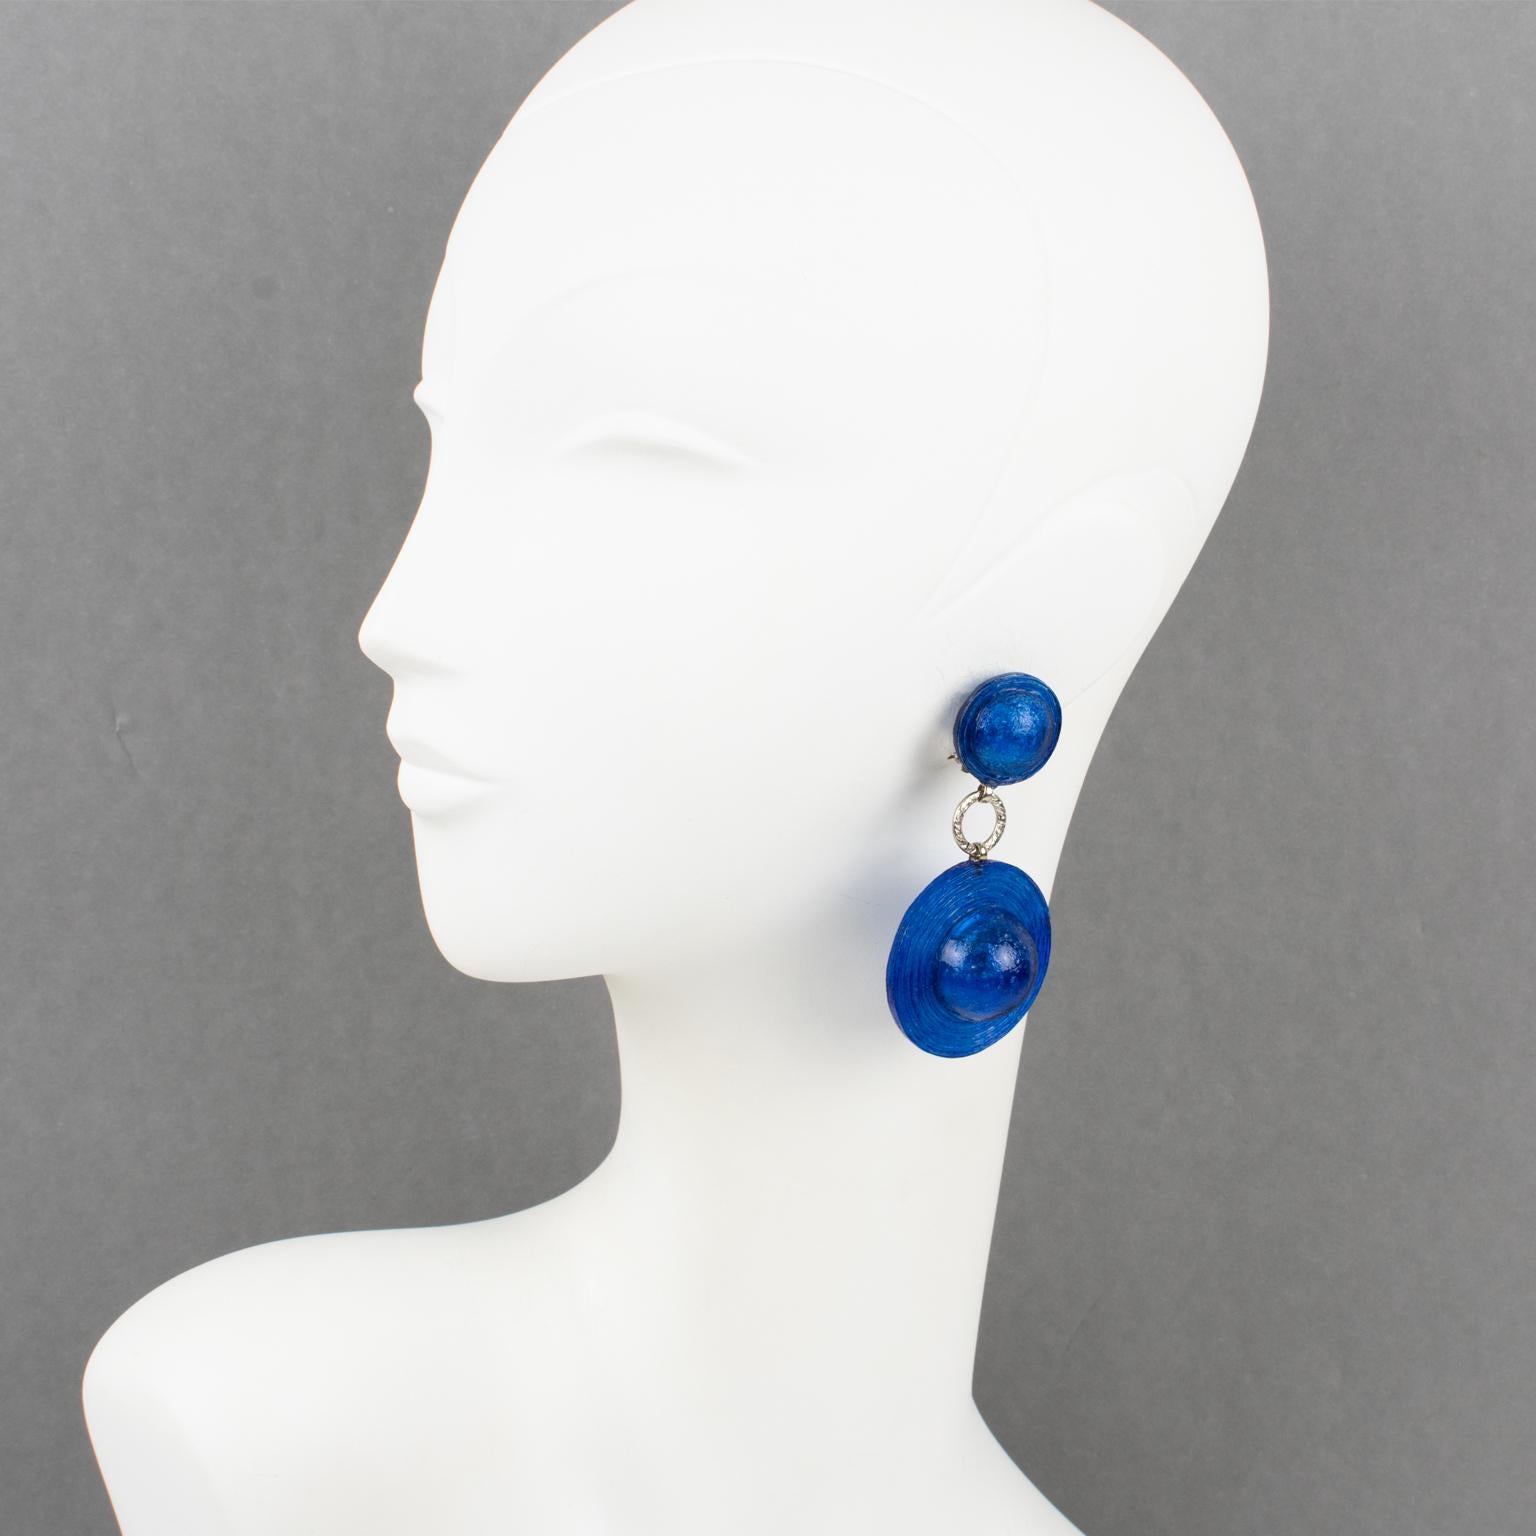 These lovely Francoise Montague Paris clip-on earrings, designed by Cilea Paris, feature an oversized dangle design in shiny translucent cobalt blue resin in a hat-like shape. The hardware and fastenings are in silvered metal. There is no visible